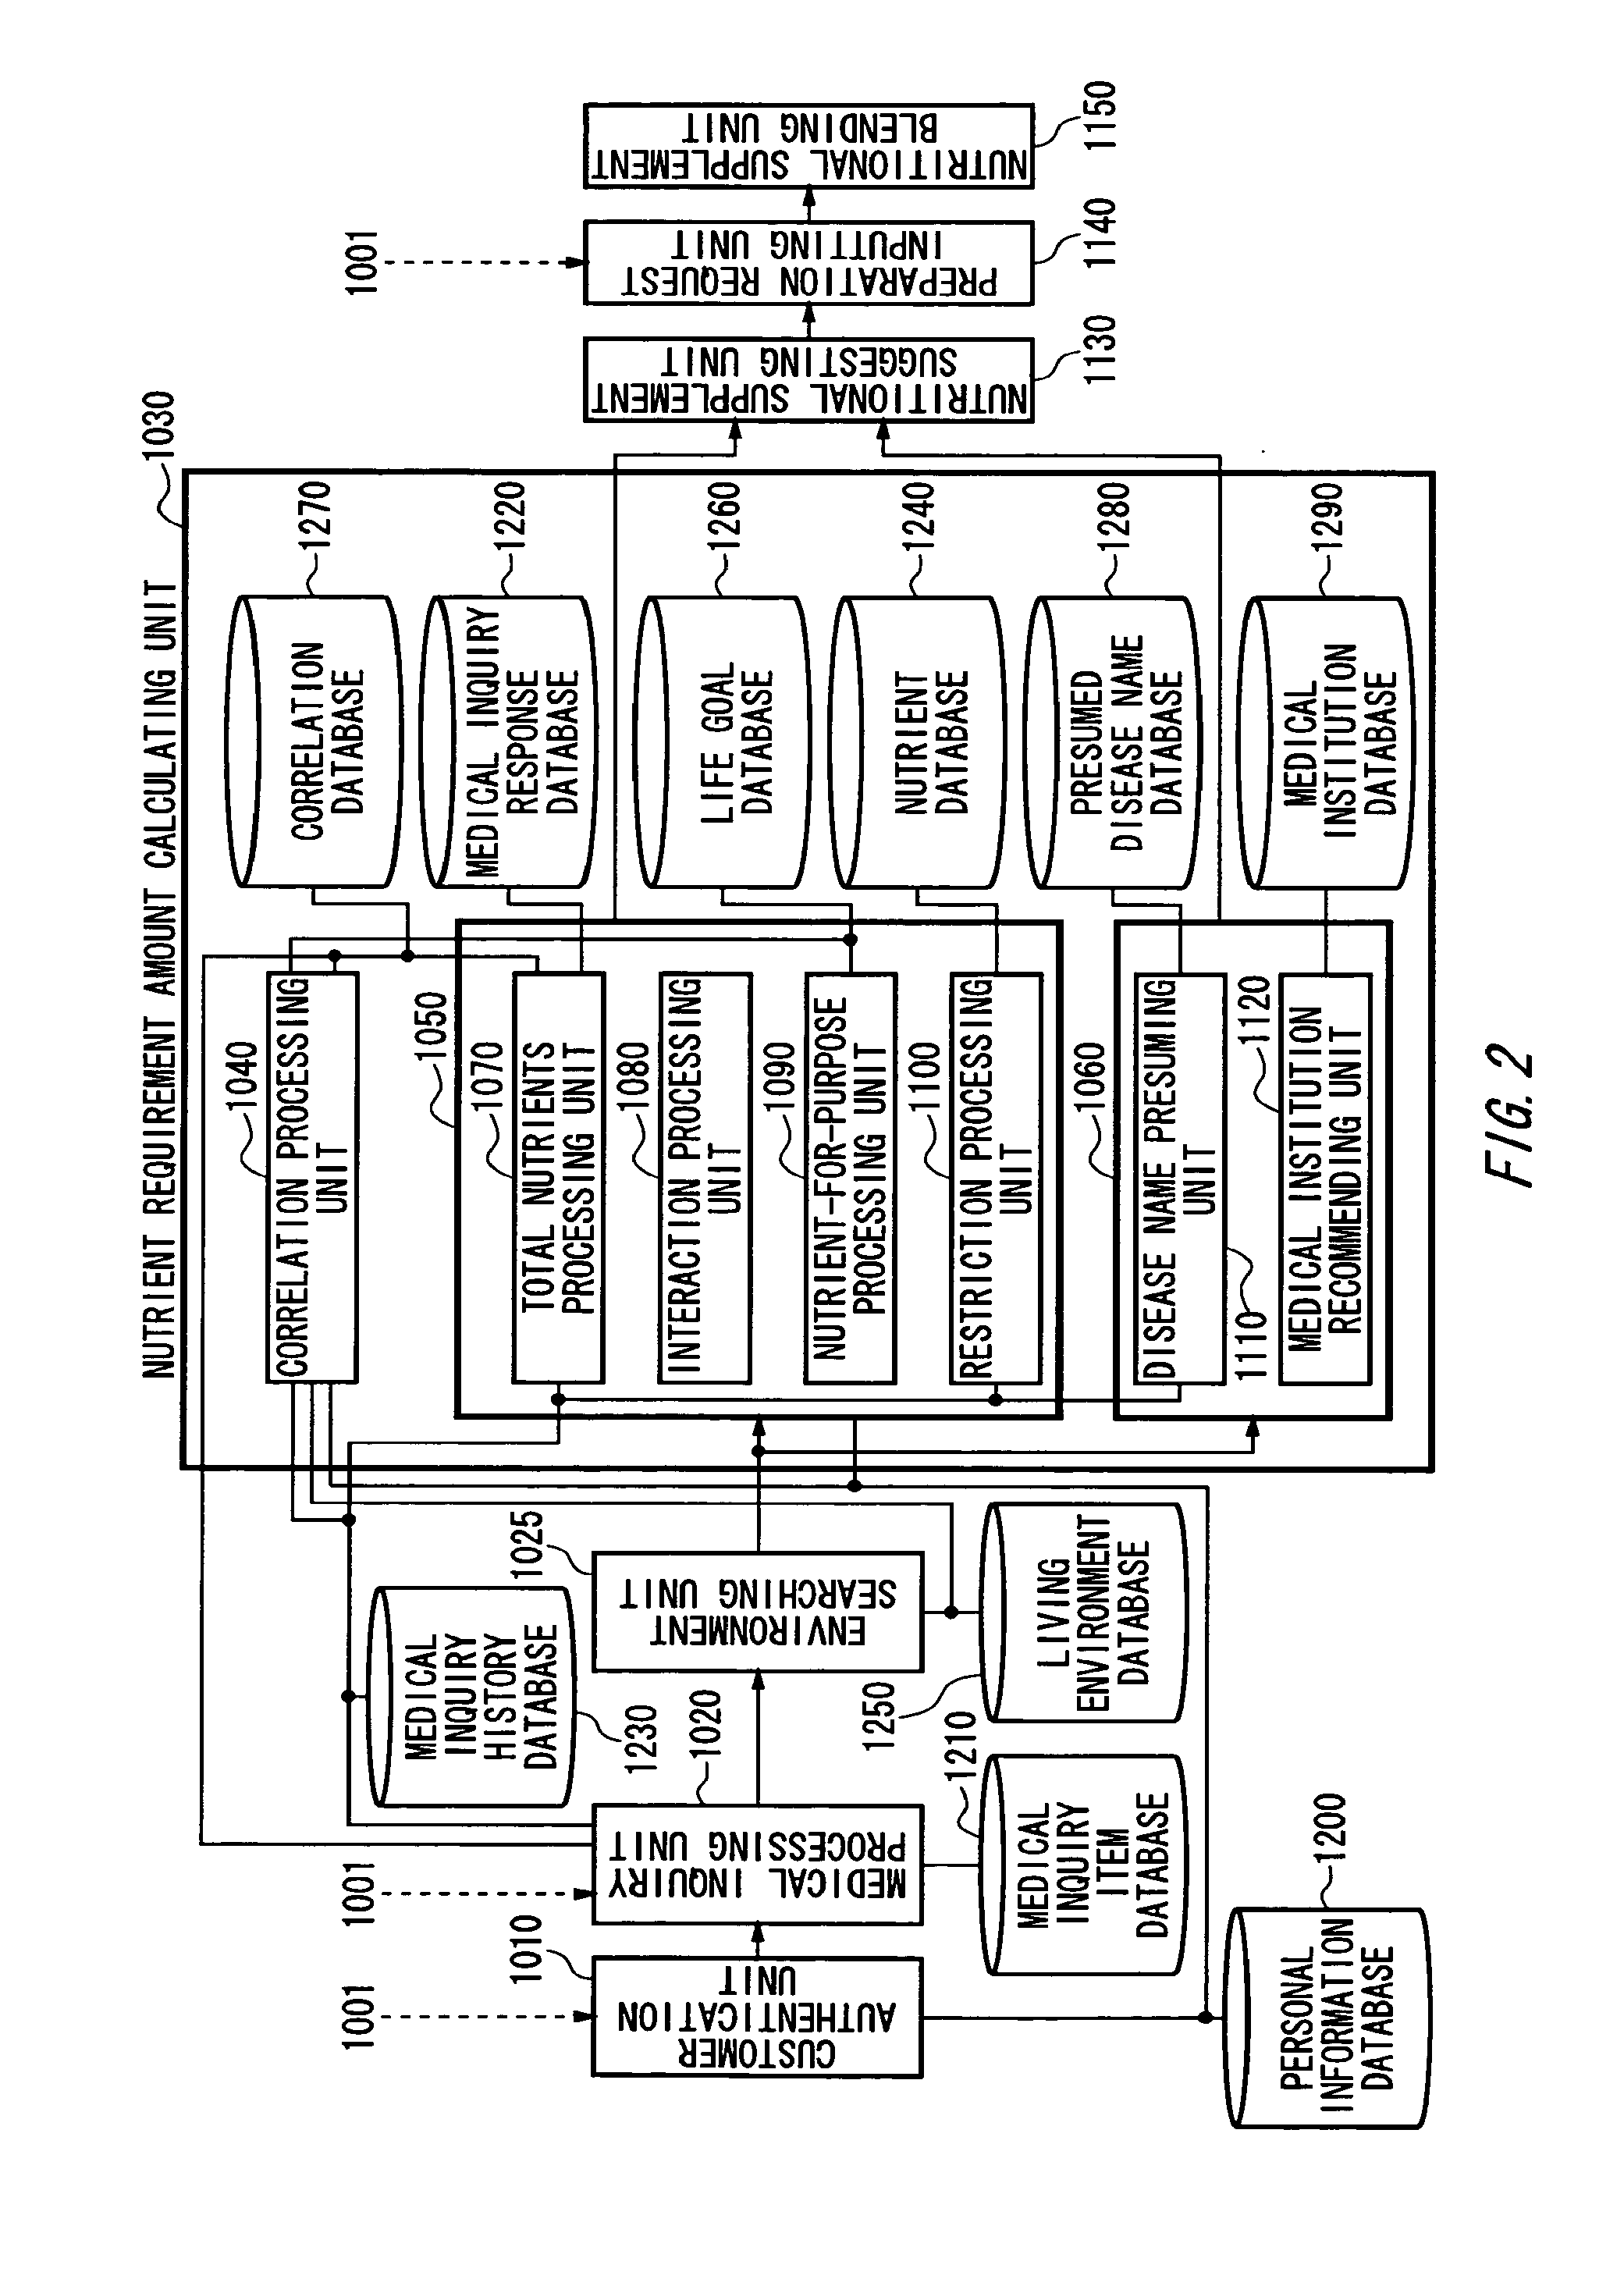 Apparatus for calculating nutrient requirement amount, an apparatus for suggesting a nutritional supplement, a blending apparatus of a nutritional supplement and a blending system of a nutritional supplement